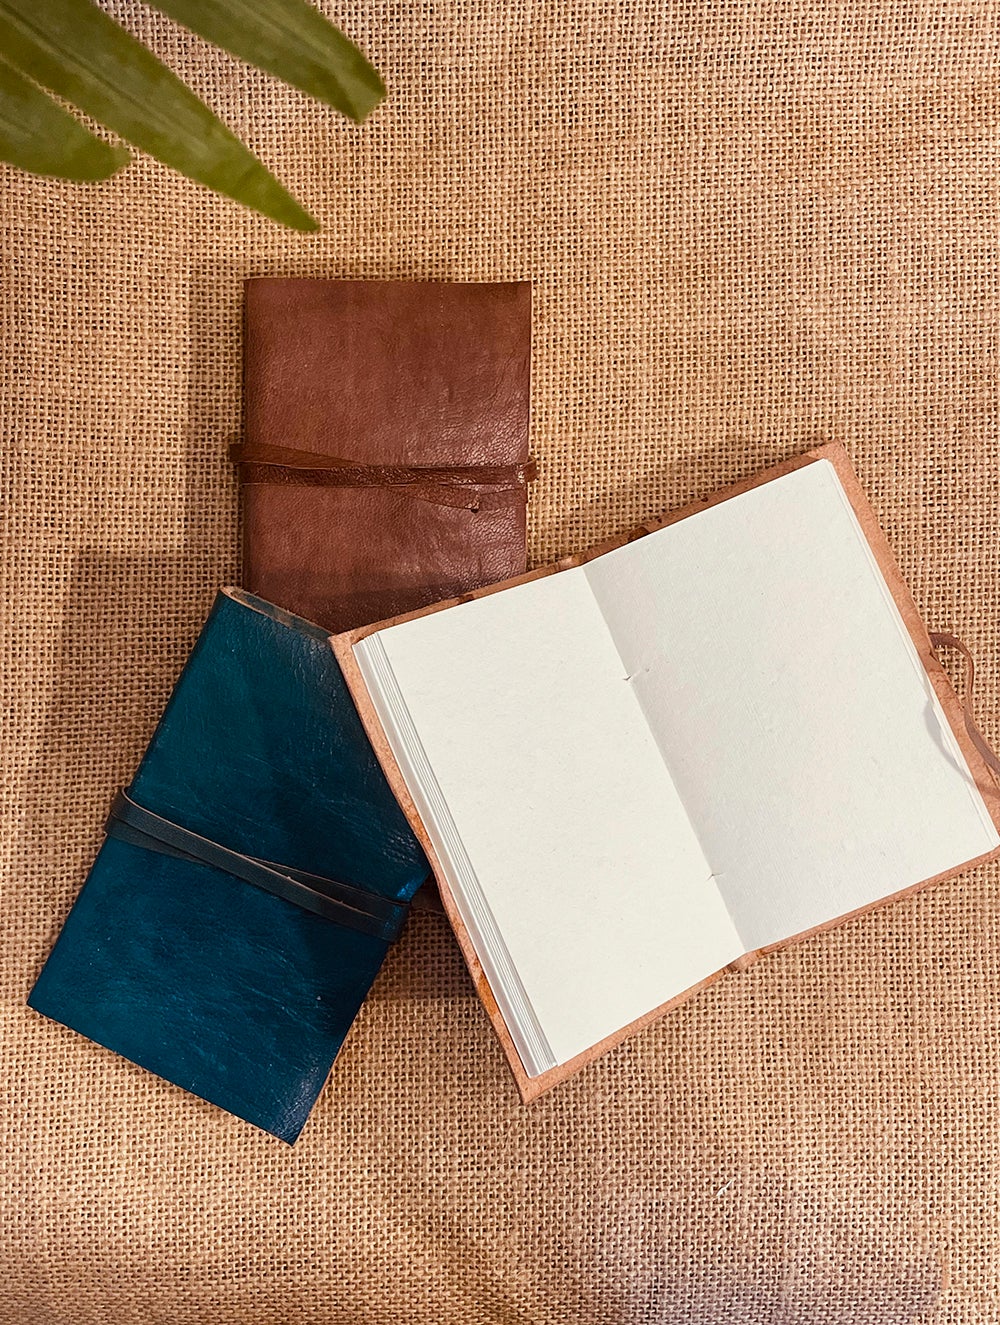 Load image into Gallery viewer, The India Craft House Handcrafted Leather Diary with Handmade Paper (Set of 3 / Small)